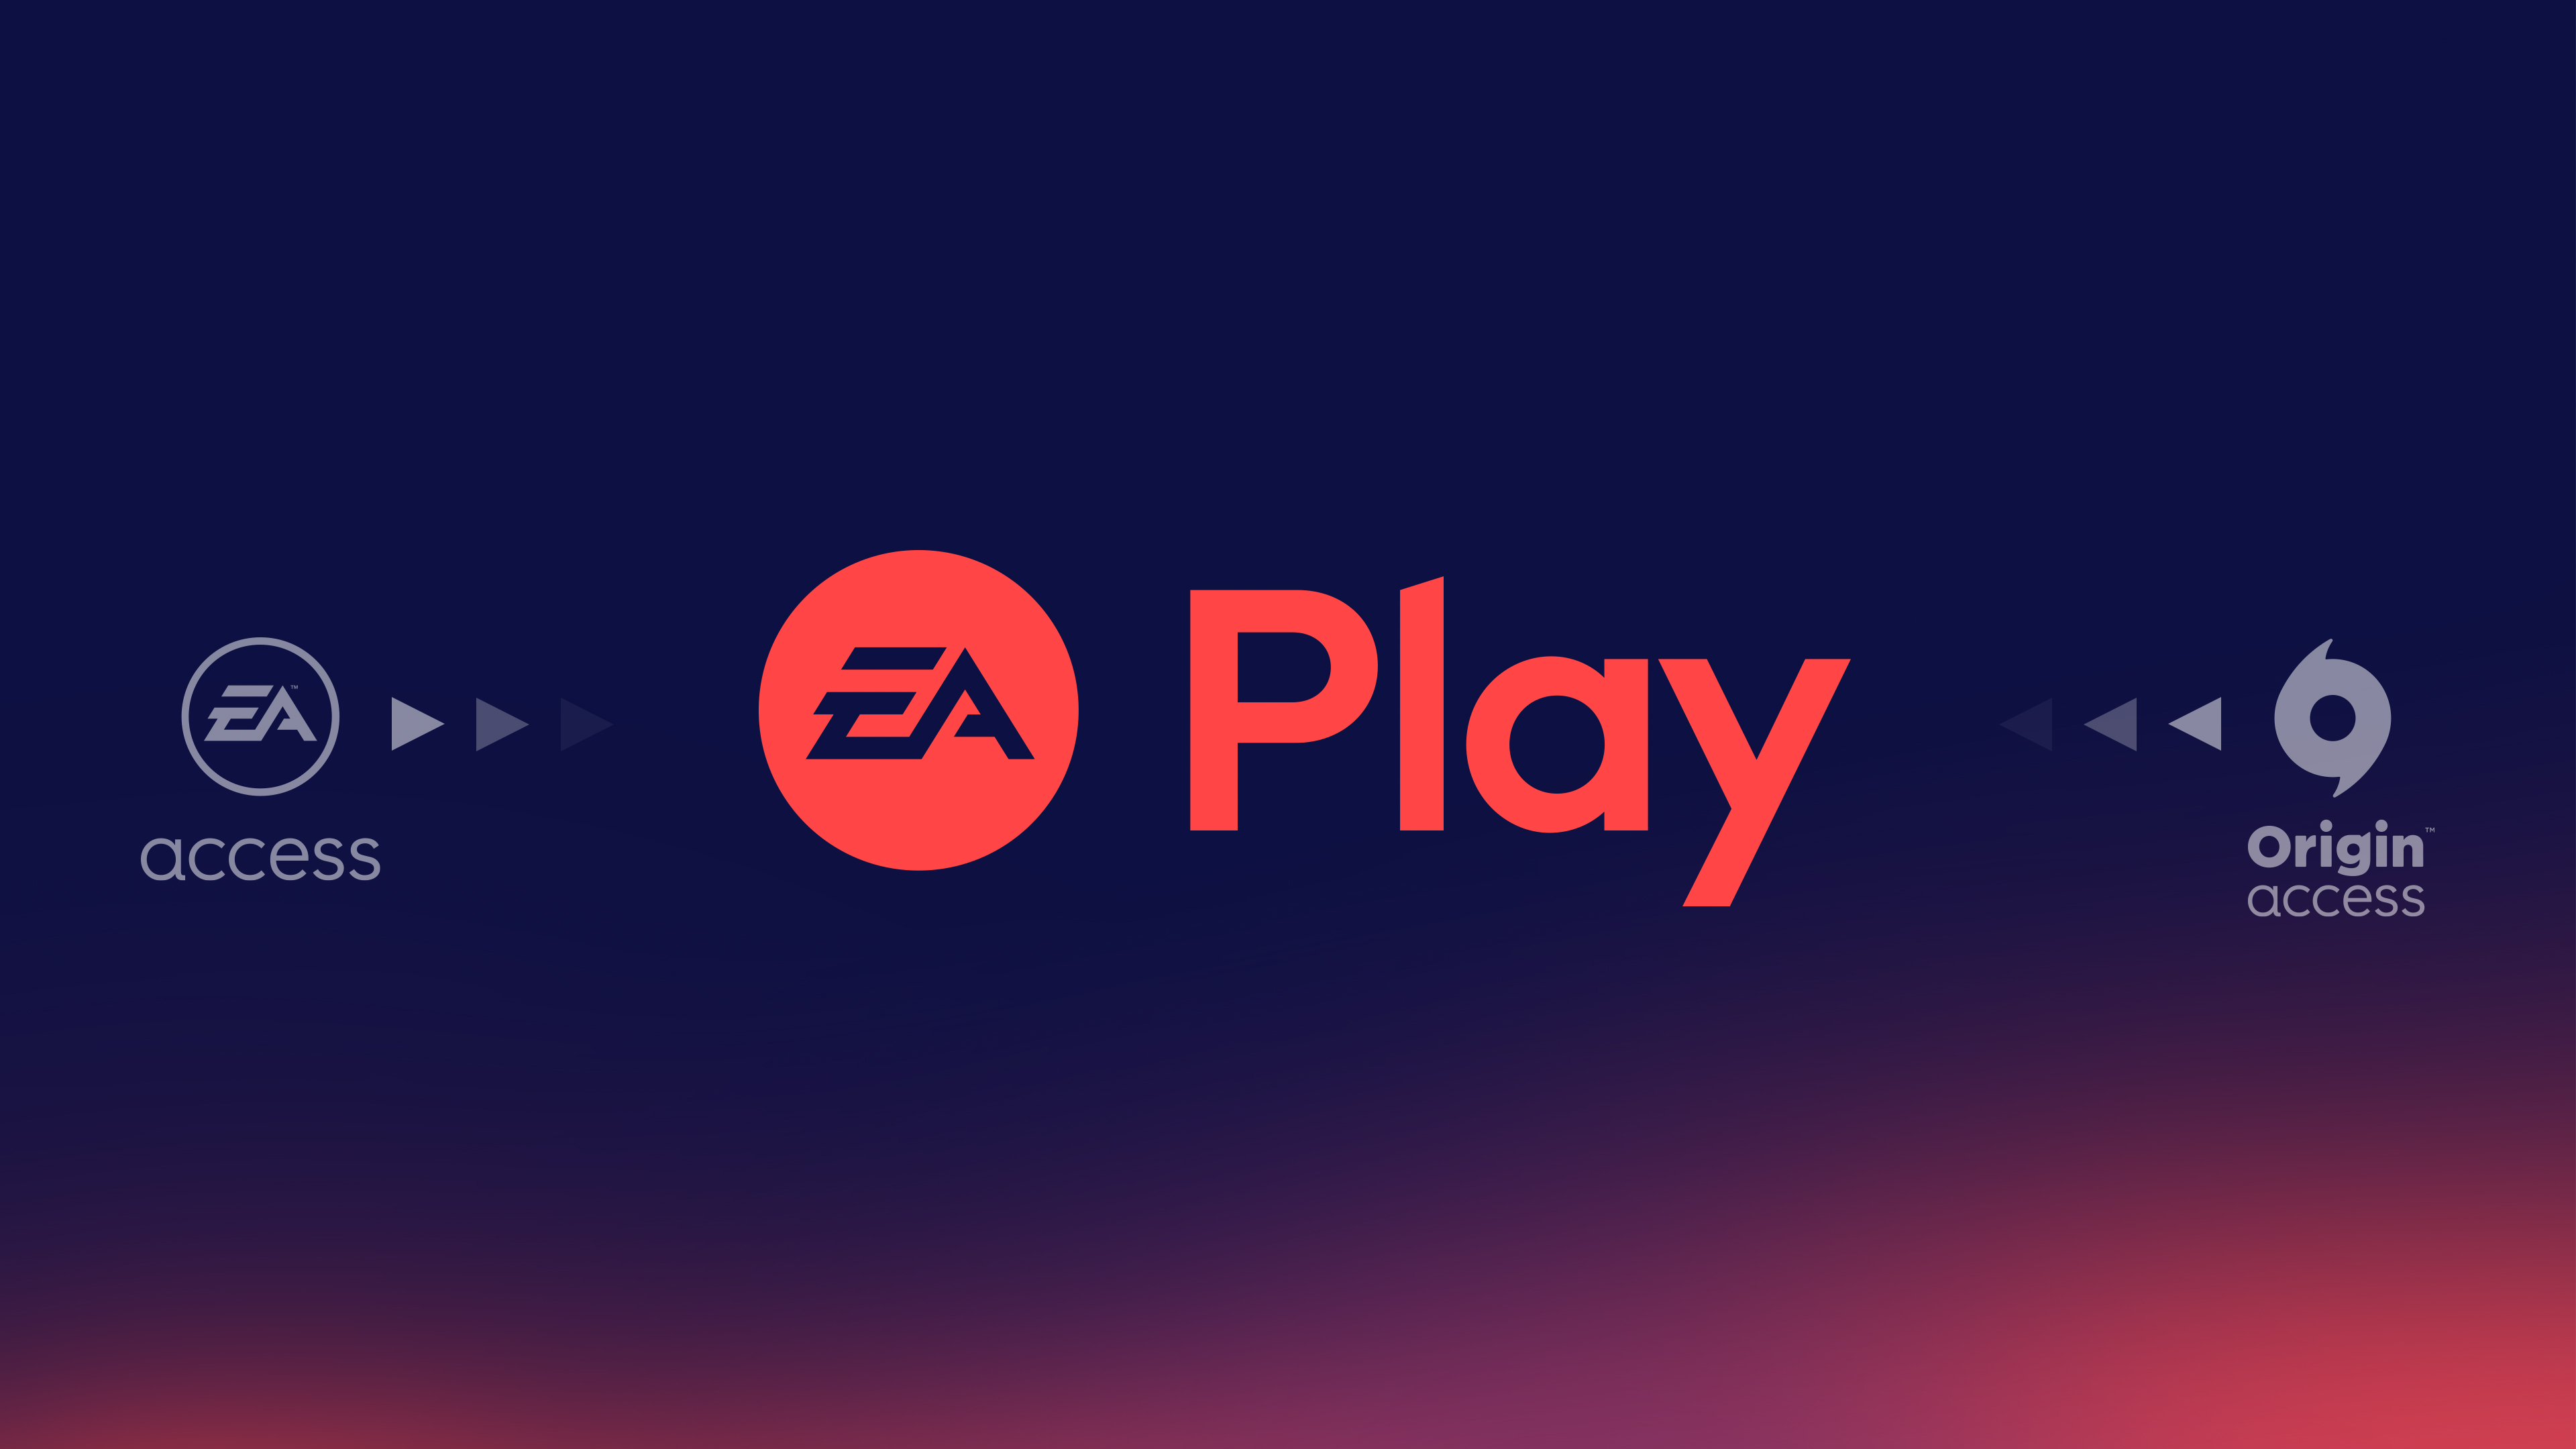 ea play game pass pc how to access